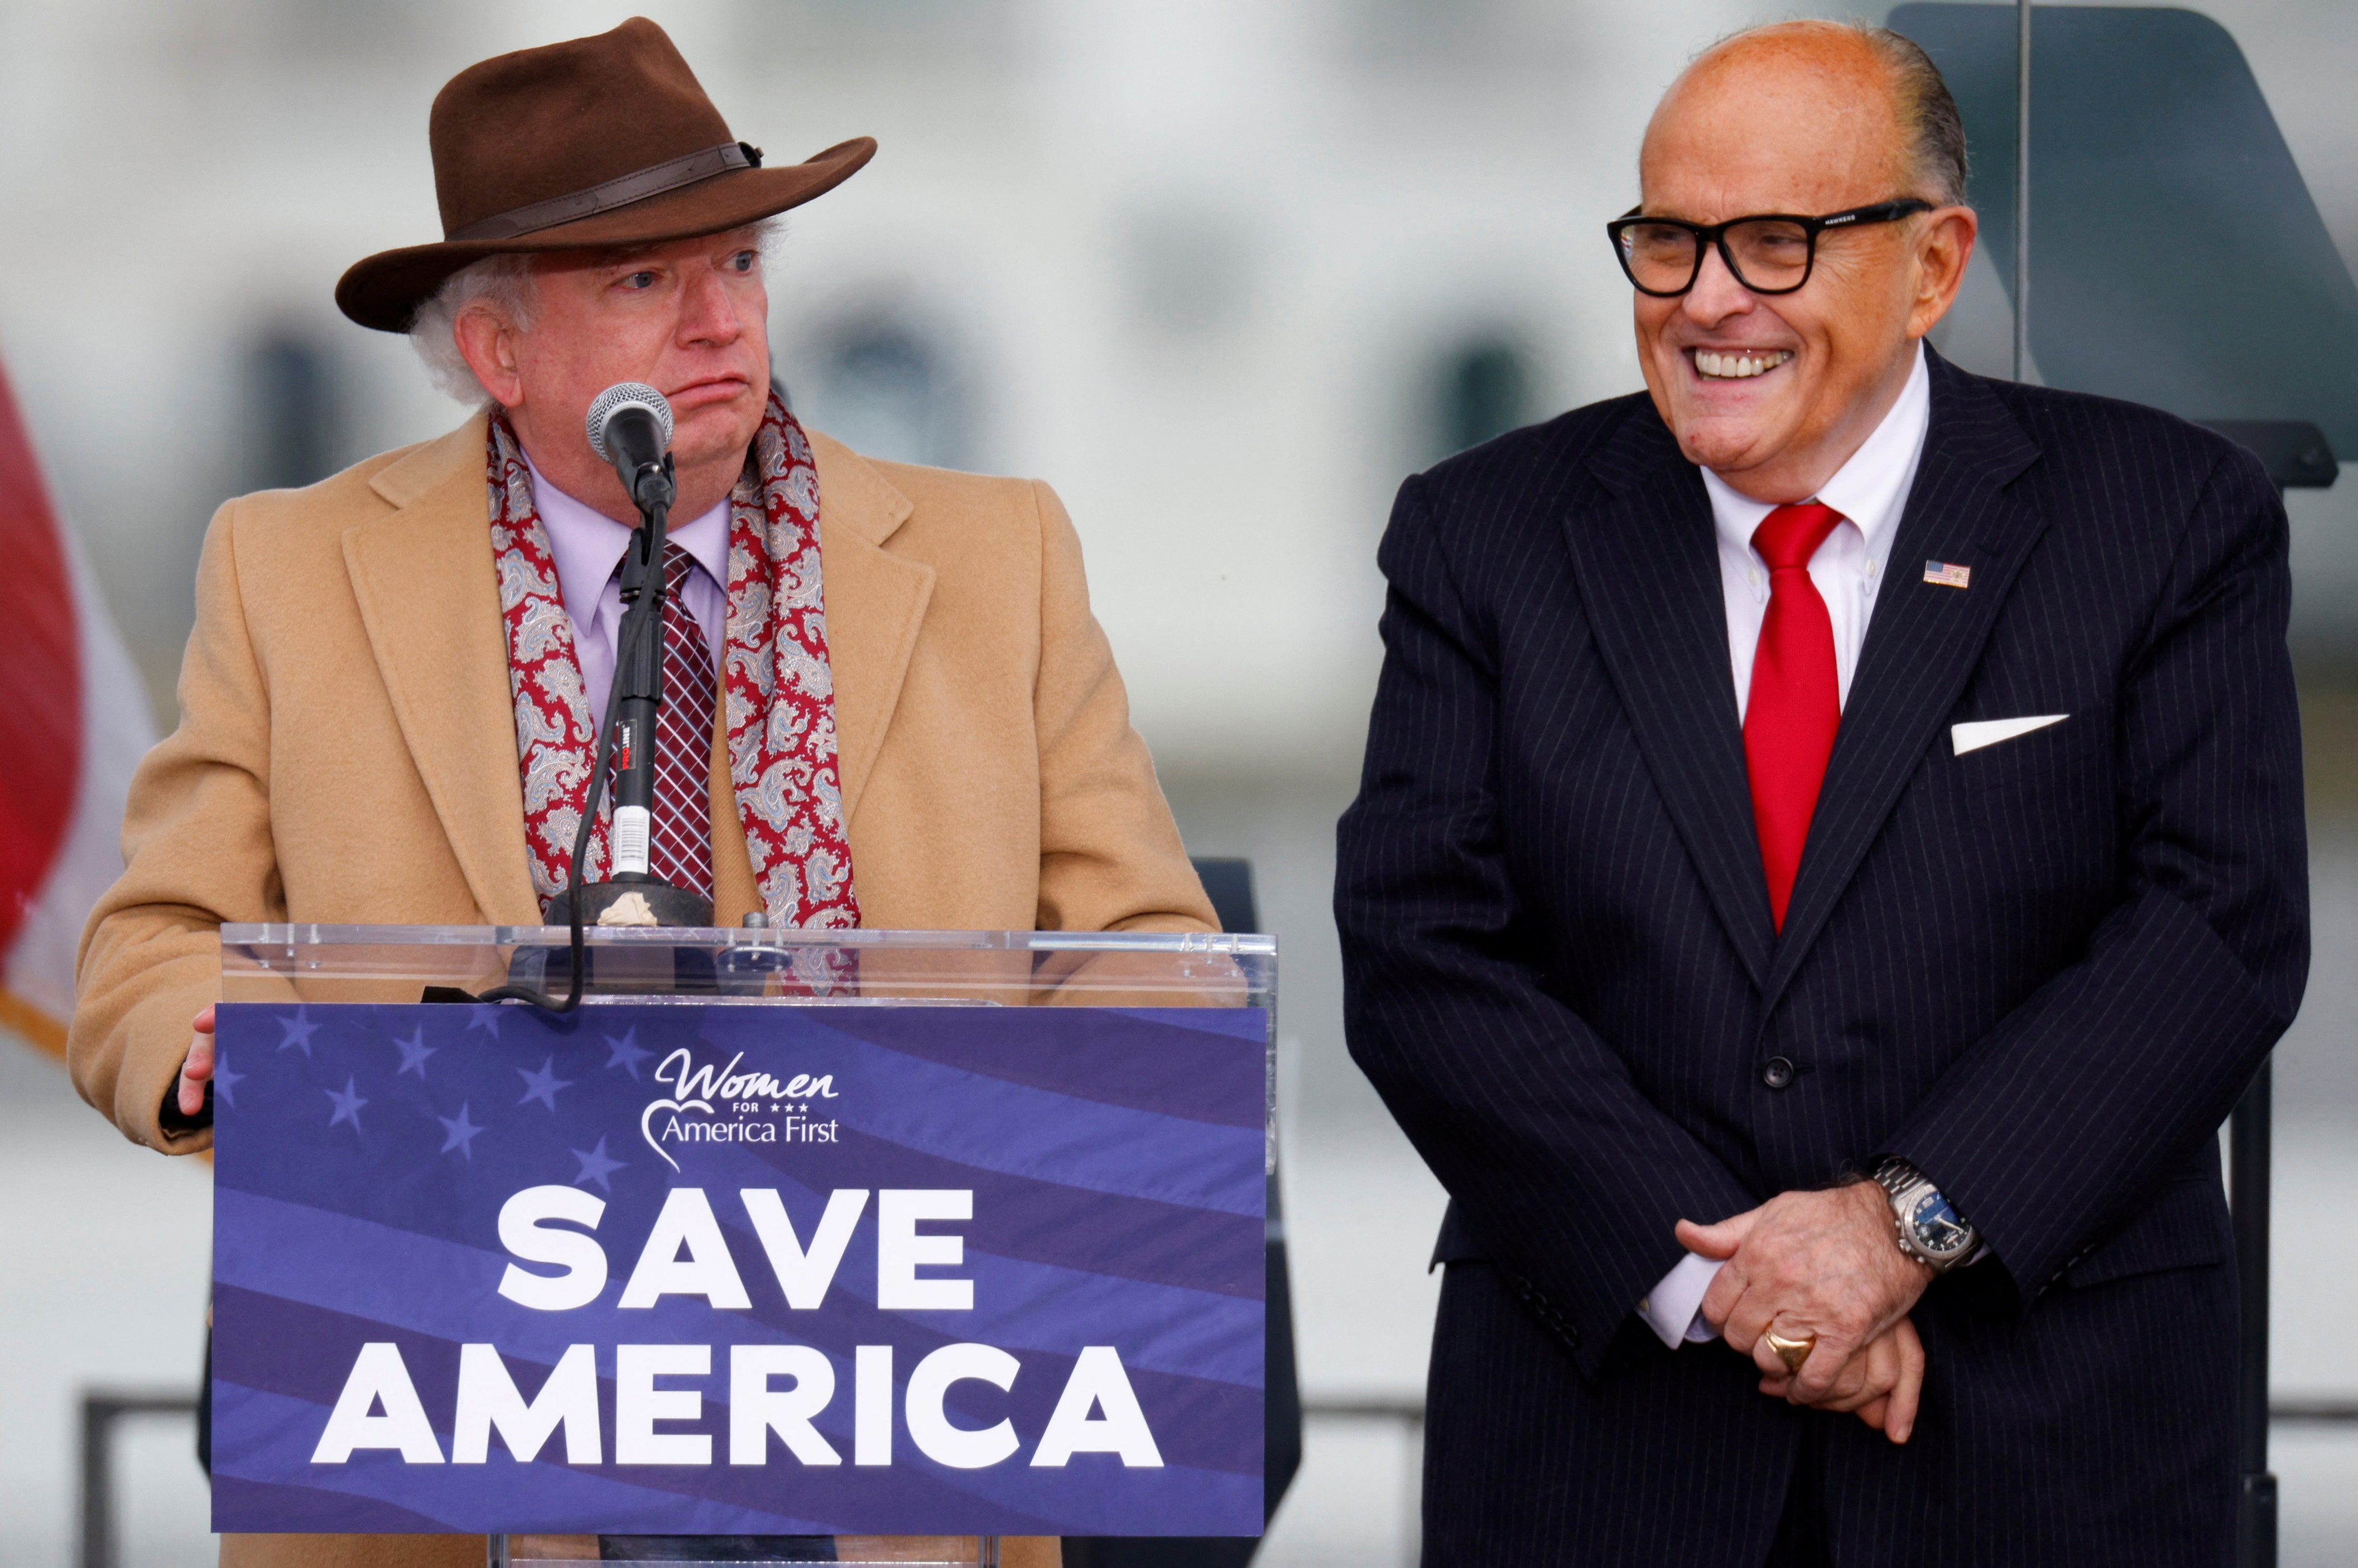 Attorneys John Eastman and Rudy Giuliani speaking to Trump supporters at the rally on January 6 2021